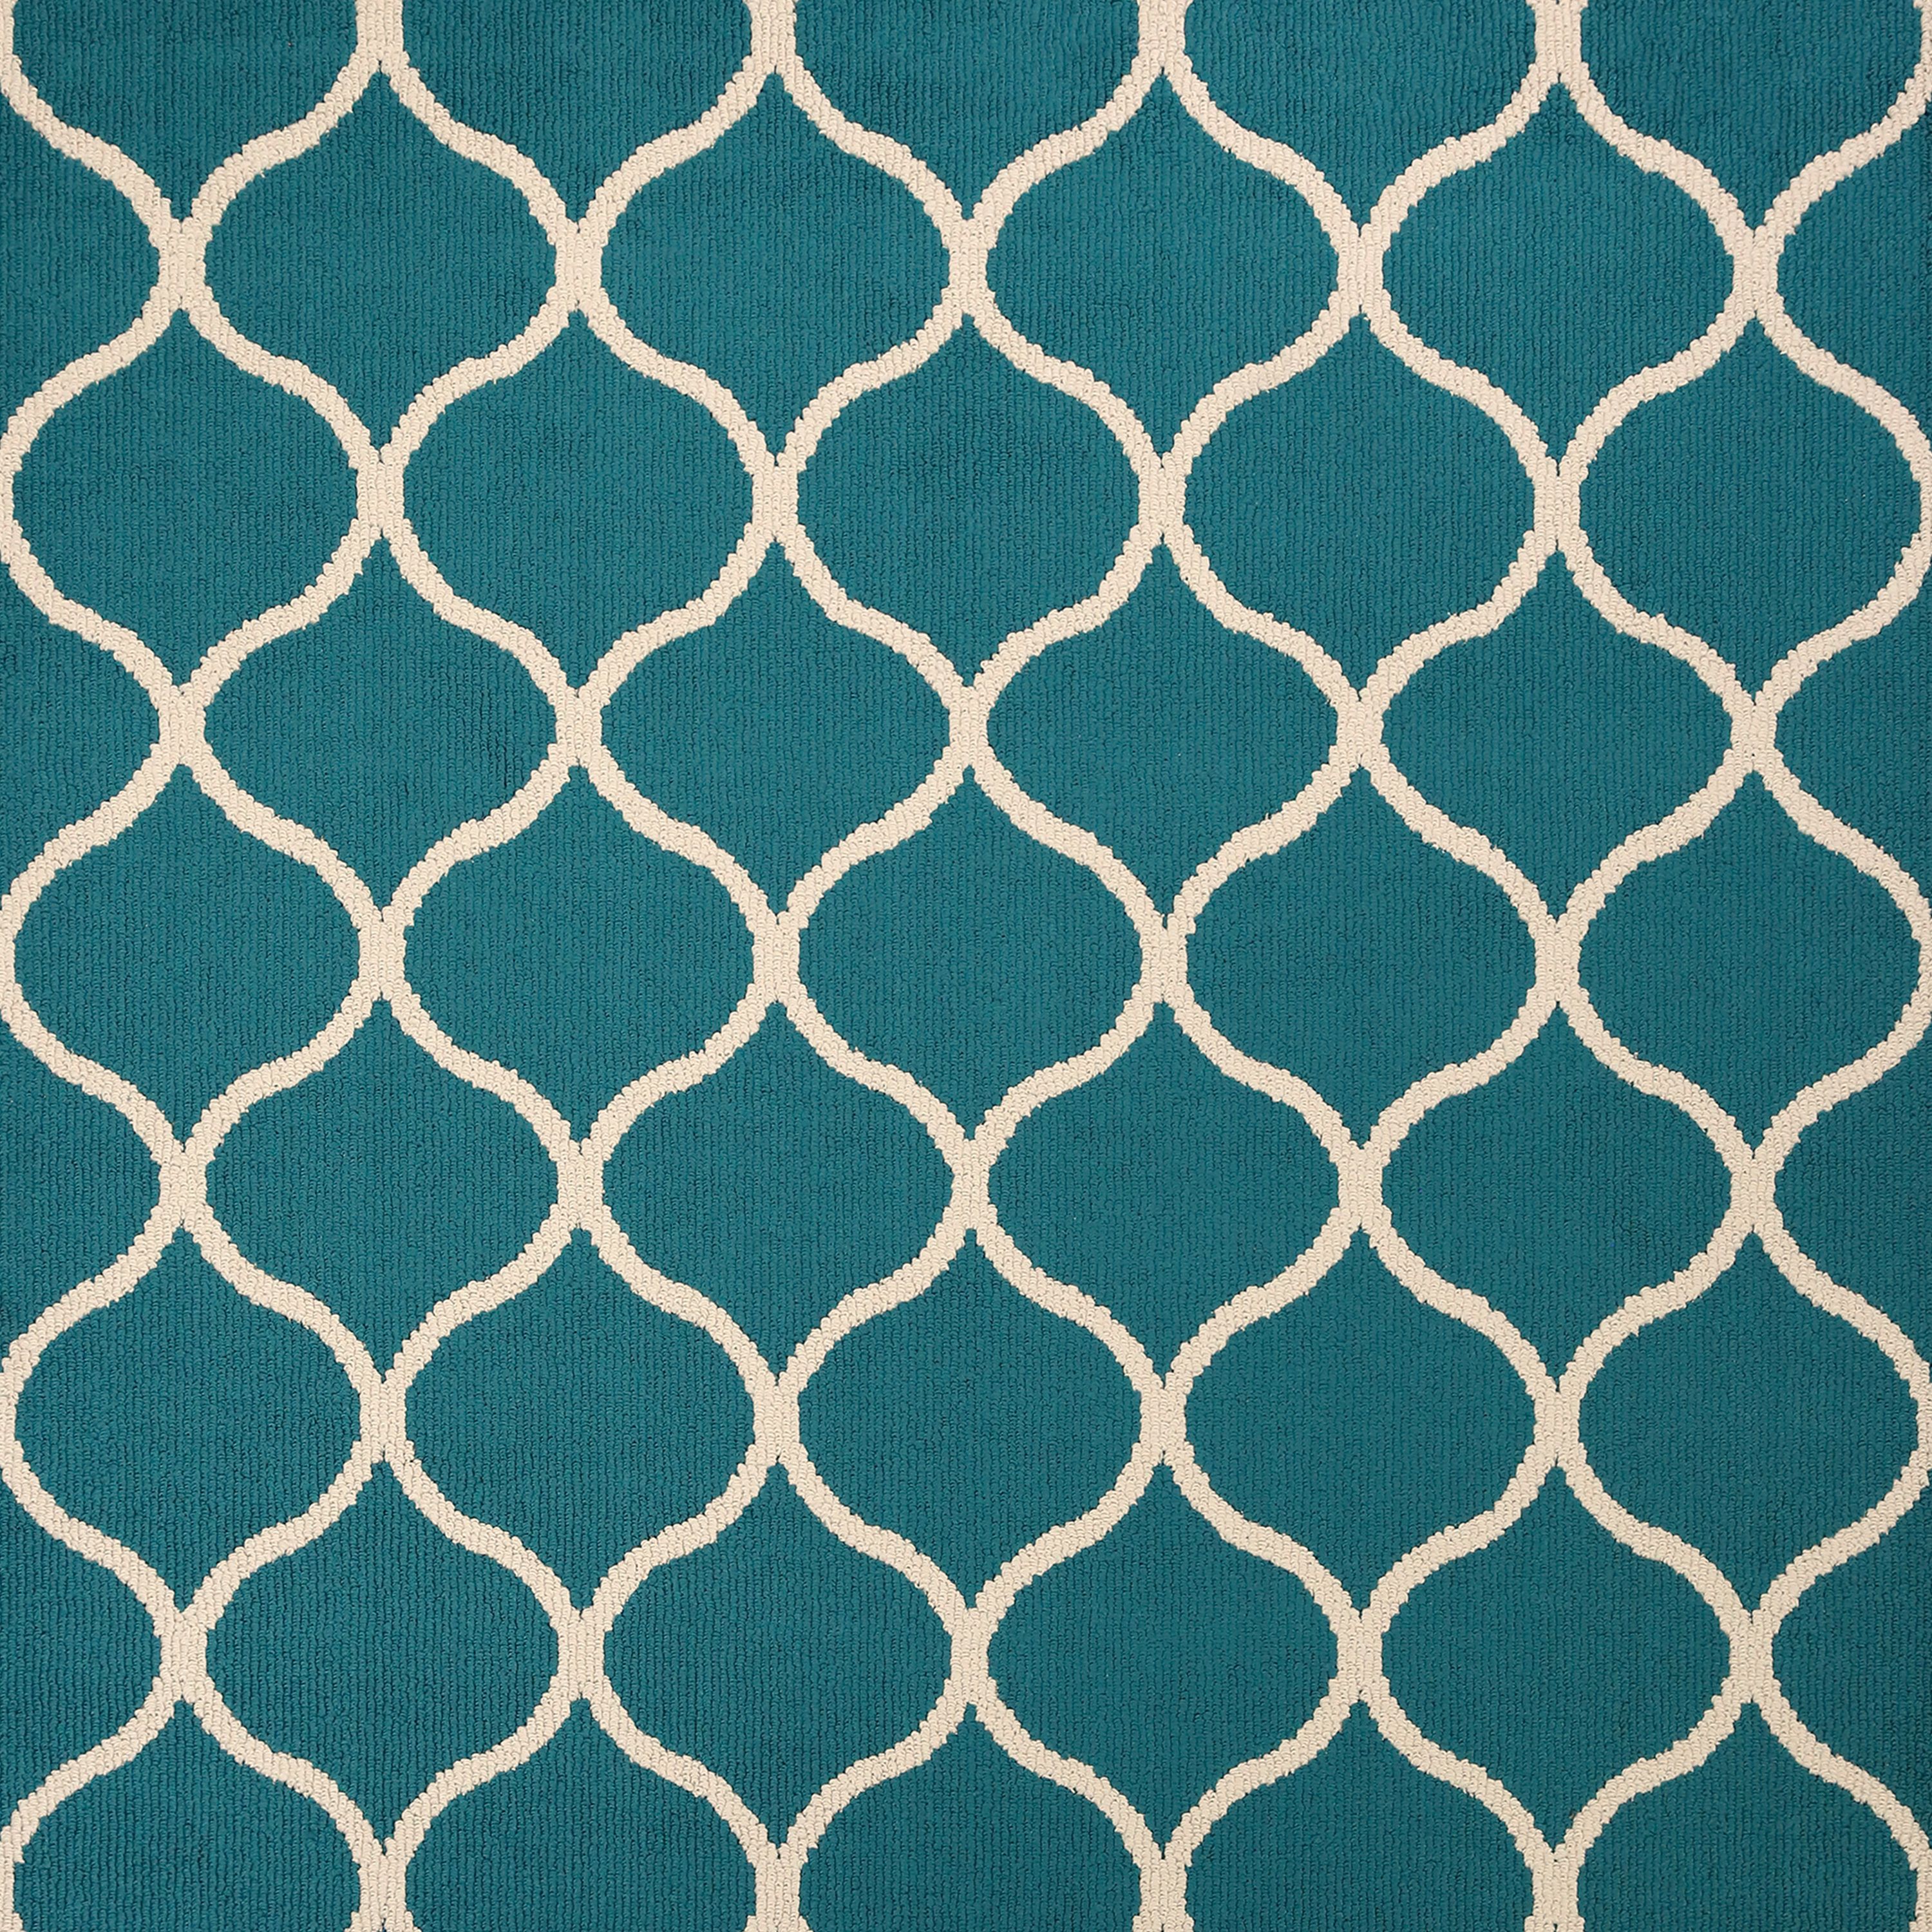 Maples Rugs Transitional Fretwork Teal Blue Living Room Indoor Area Rug, 5' x 7' - image 3 of 6